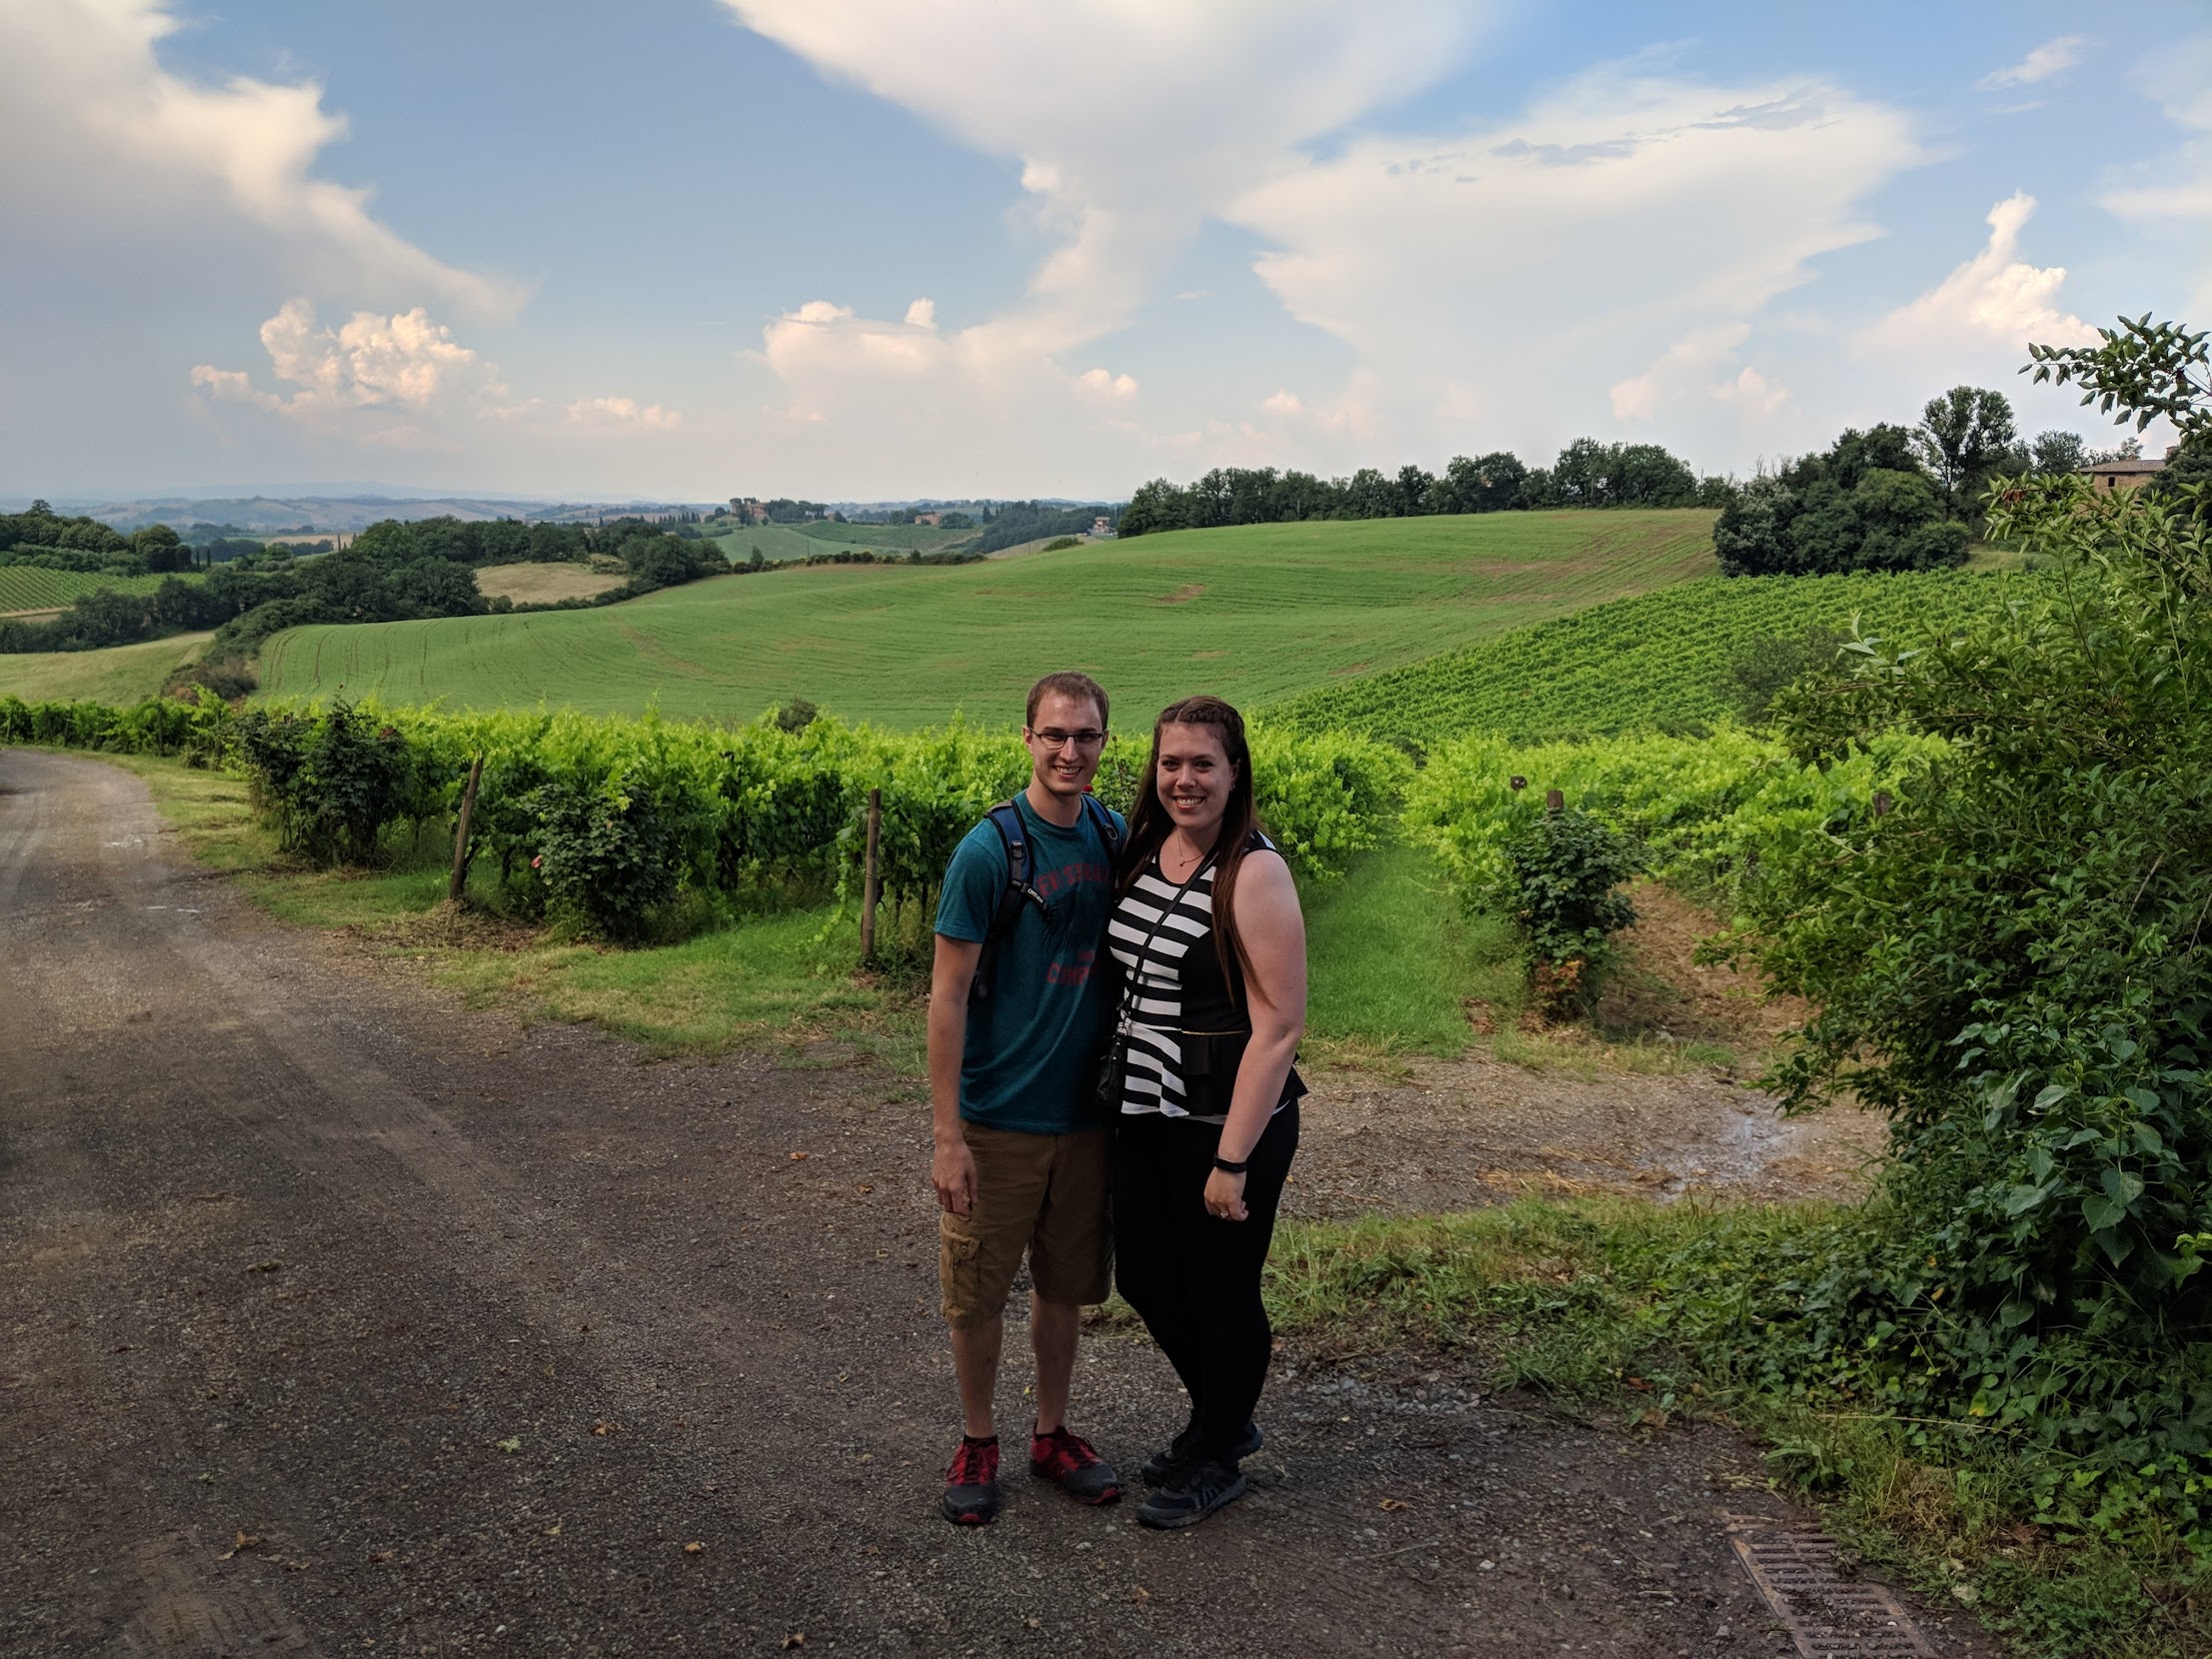 Man and woman standing in vineyard in Tuscany, Italy